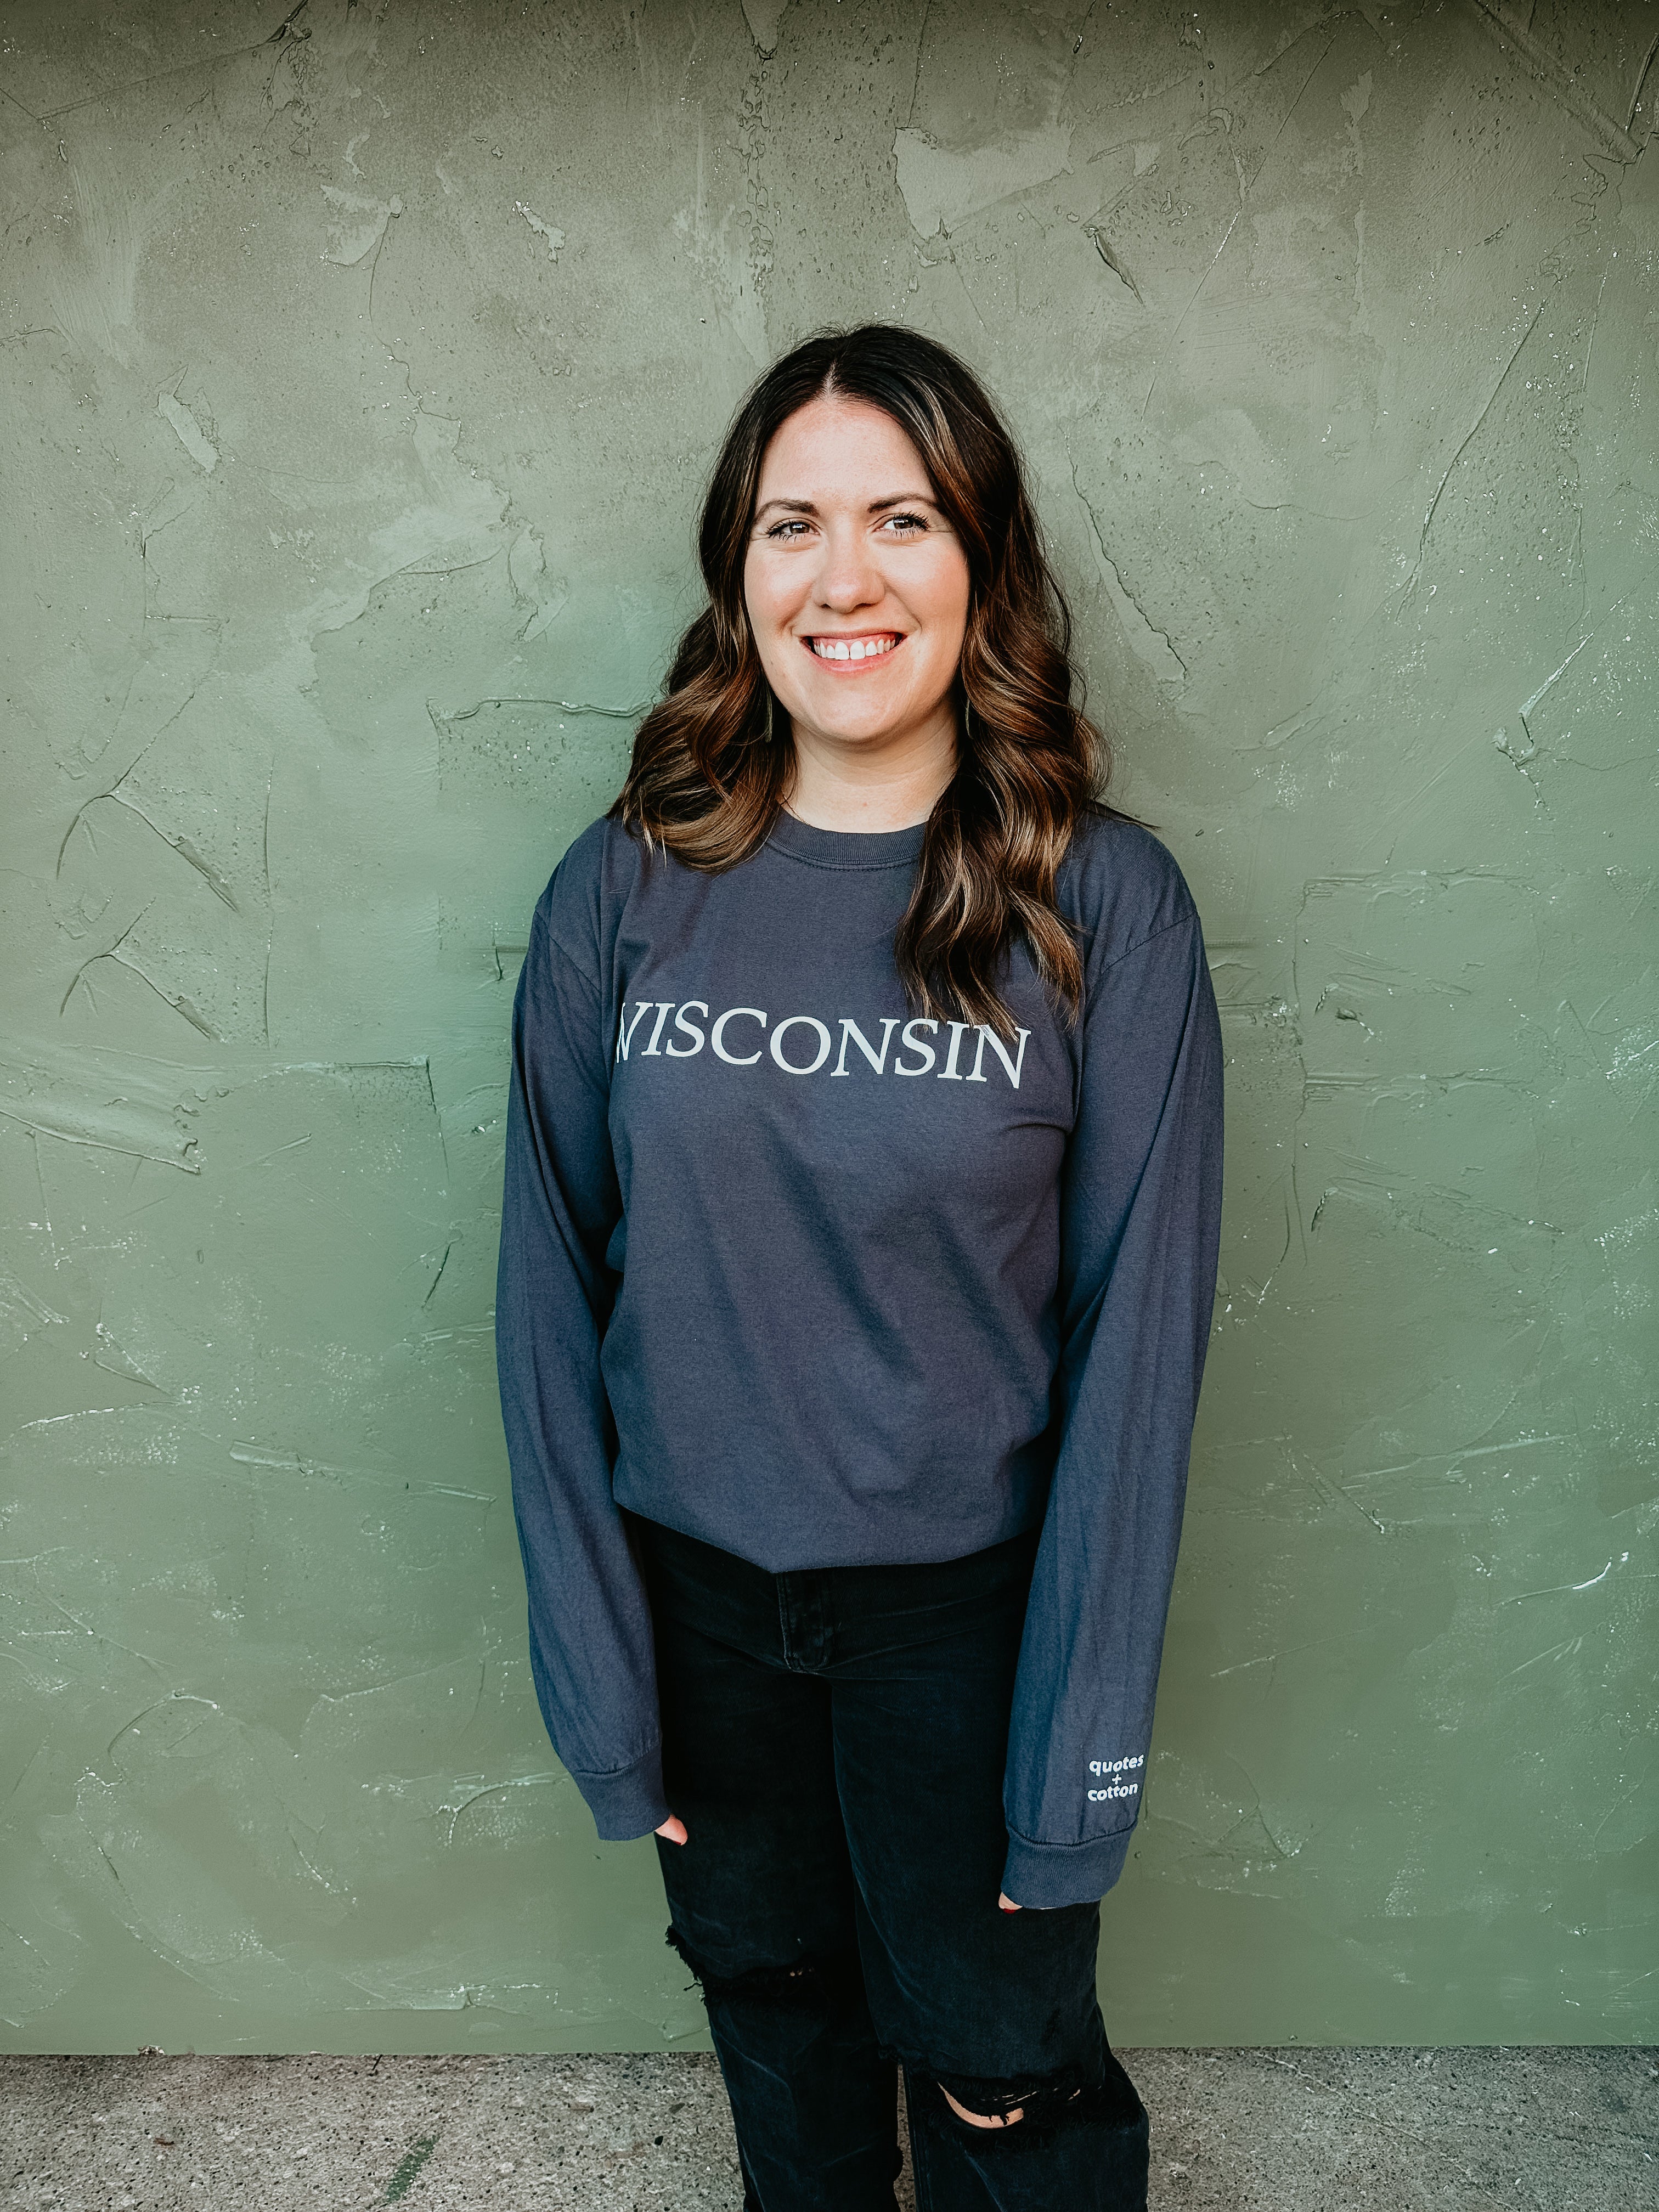 the Wisconsin Long Sleeve